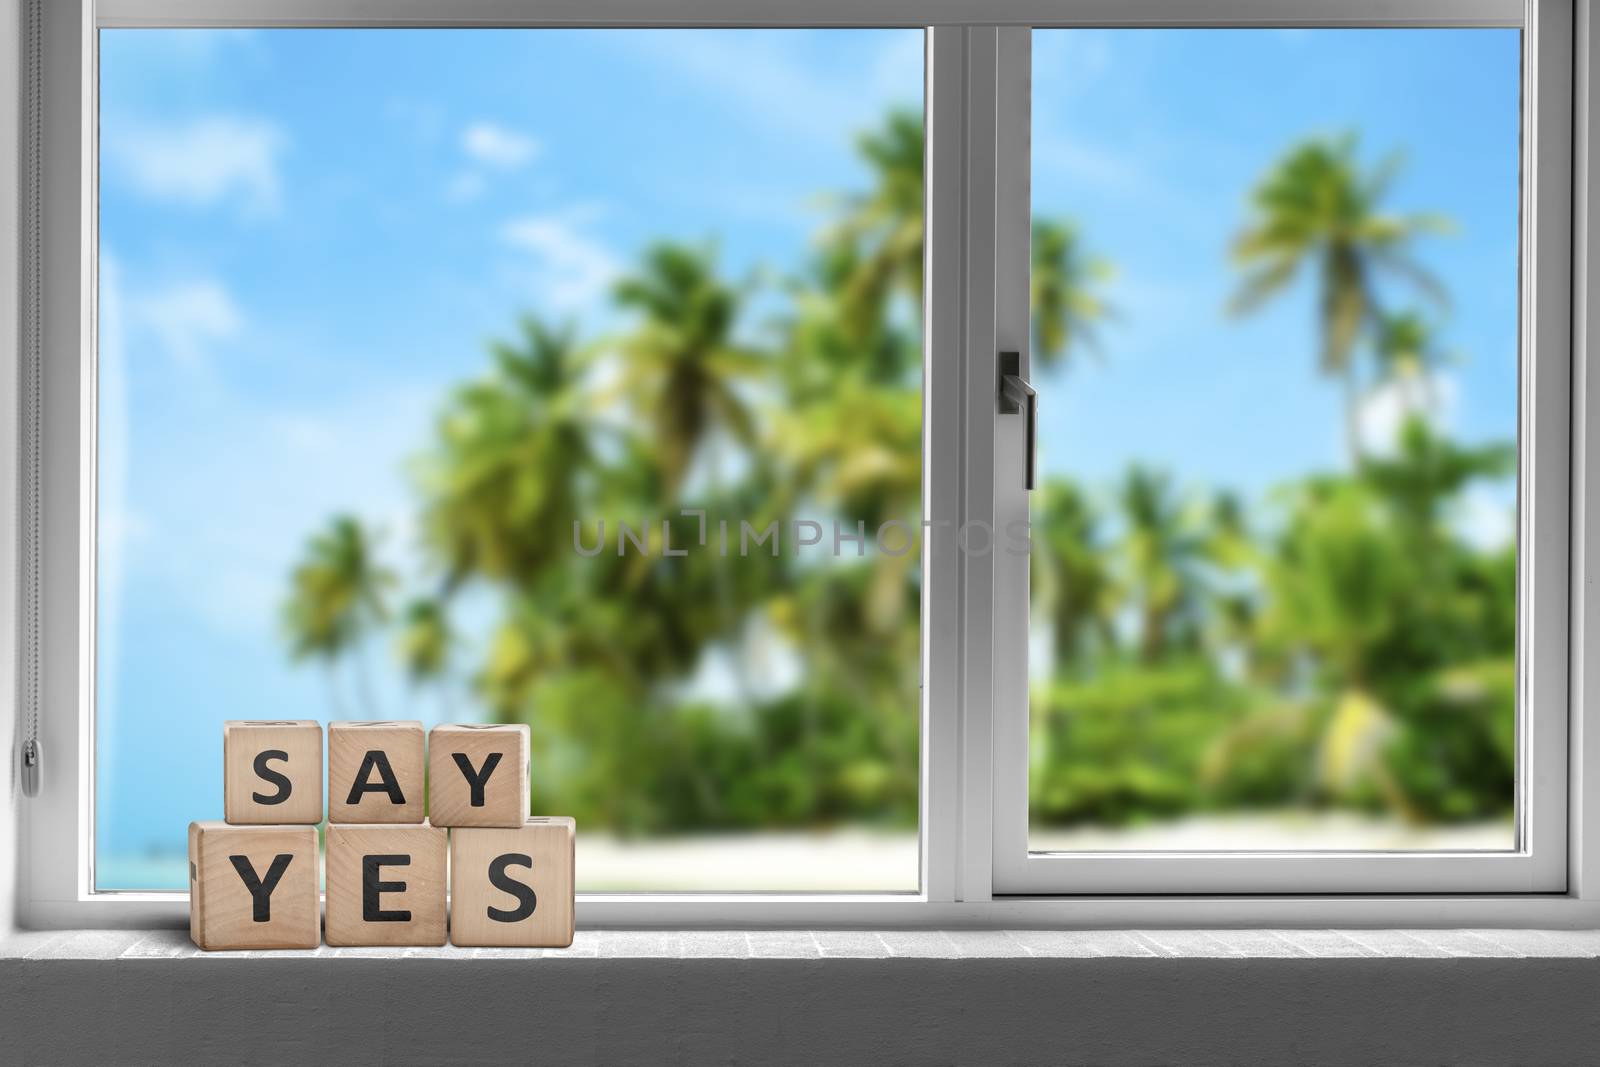 Say yes sign in a window on a tropical beach with palm trees in the summer sun